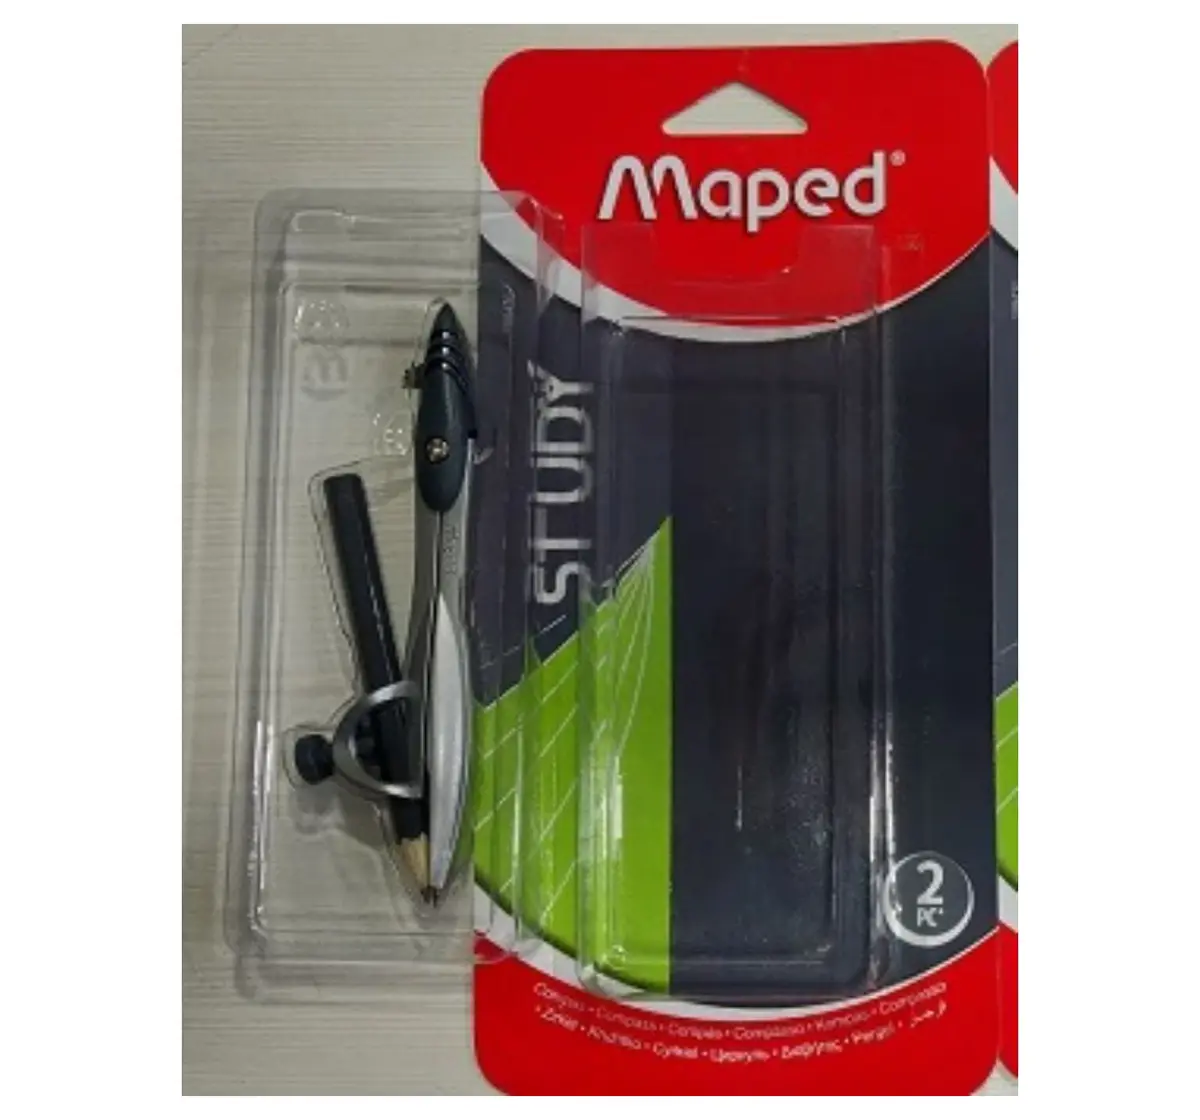 Maped Compass Study Holder With Pencil, 7Y+ (Grey)